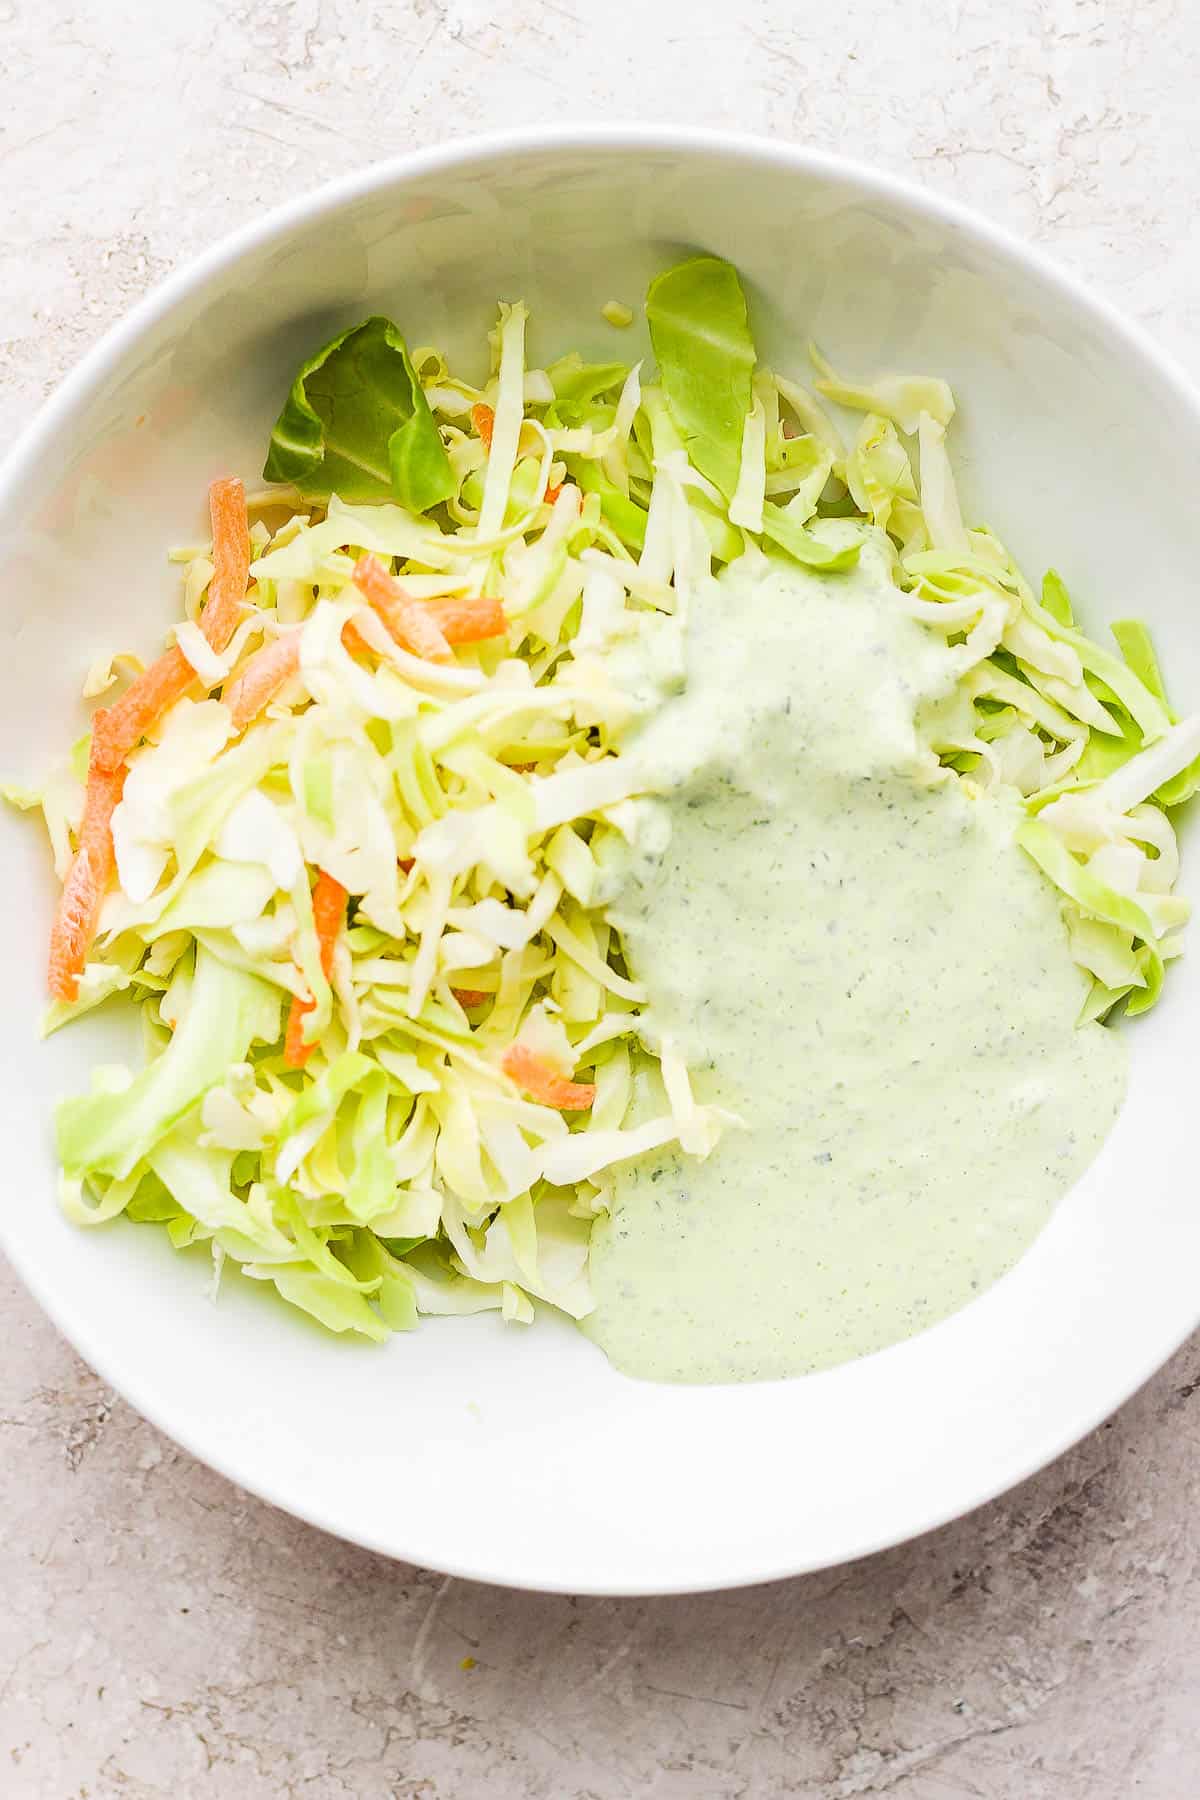 Coleslaw mixture in a bowl with some green goddess dressing.